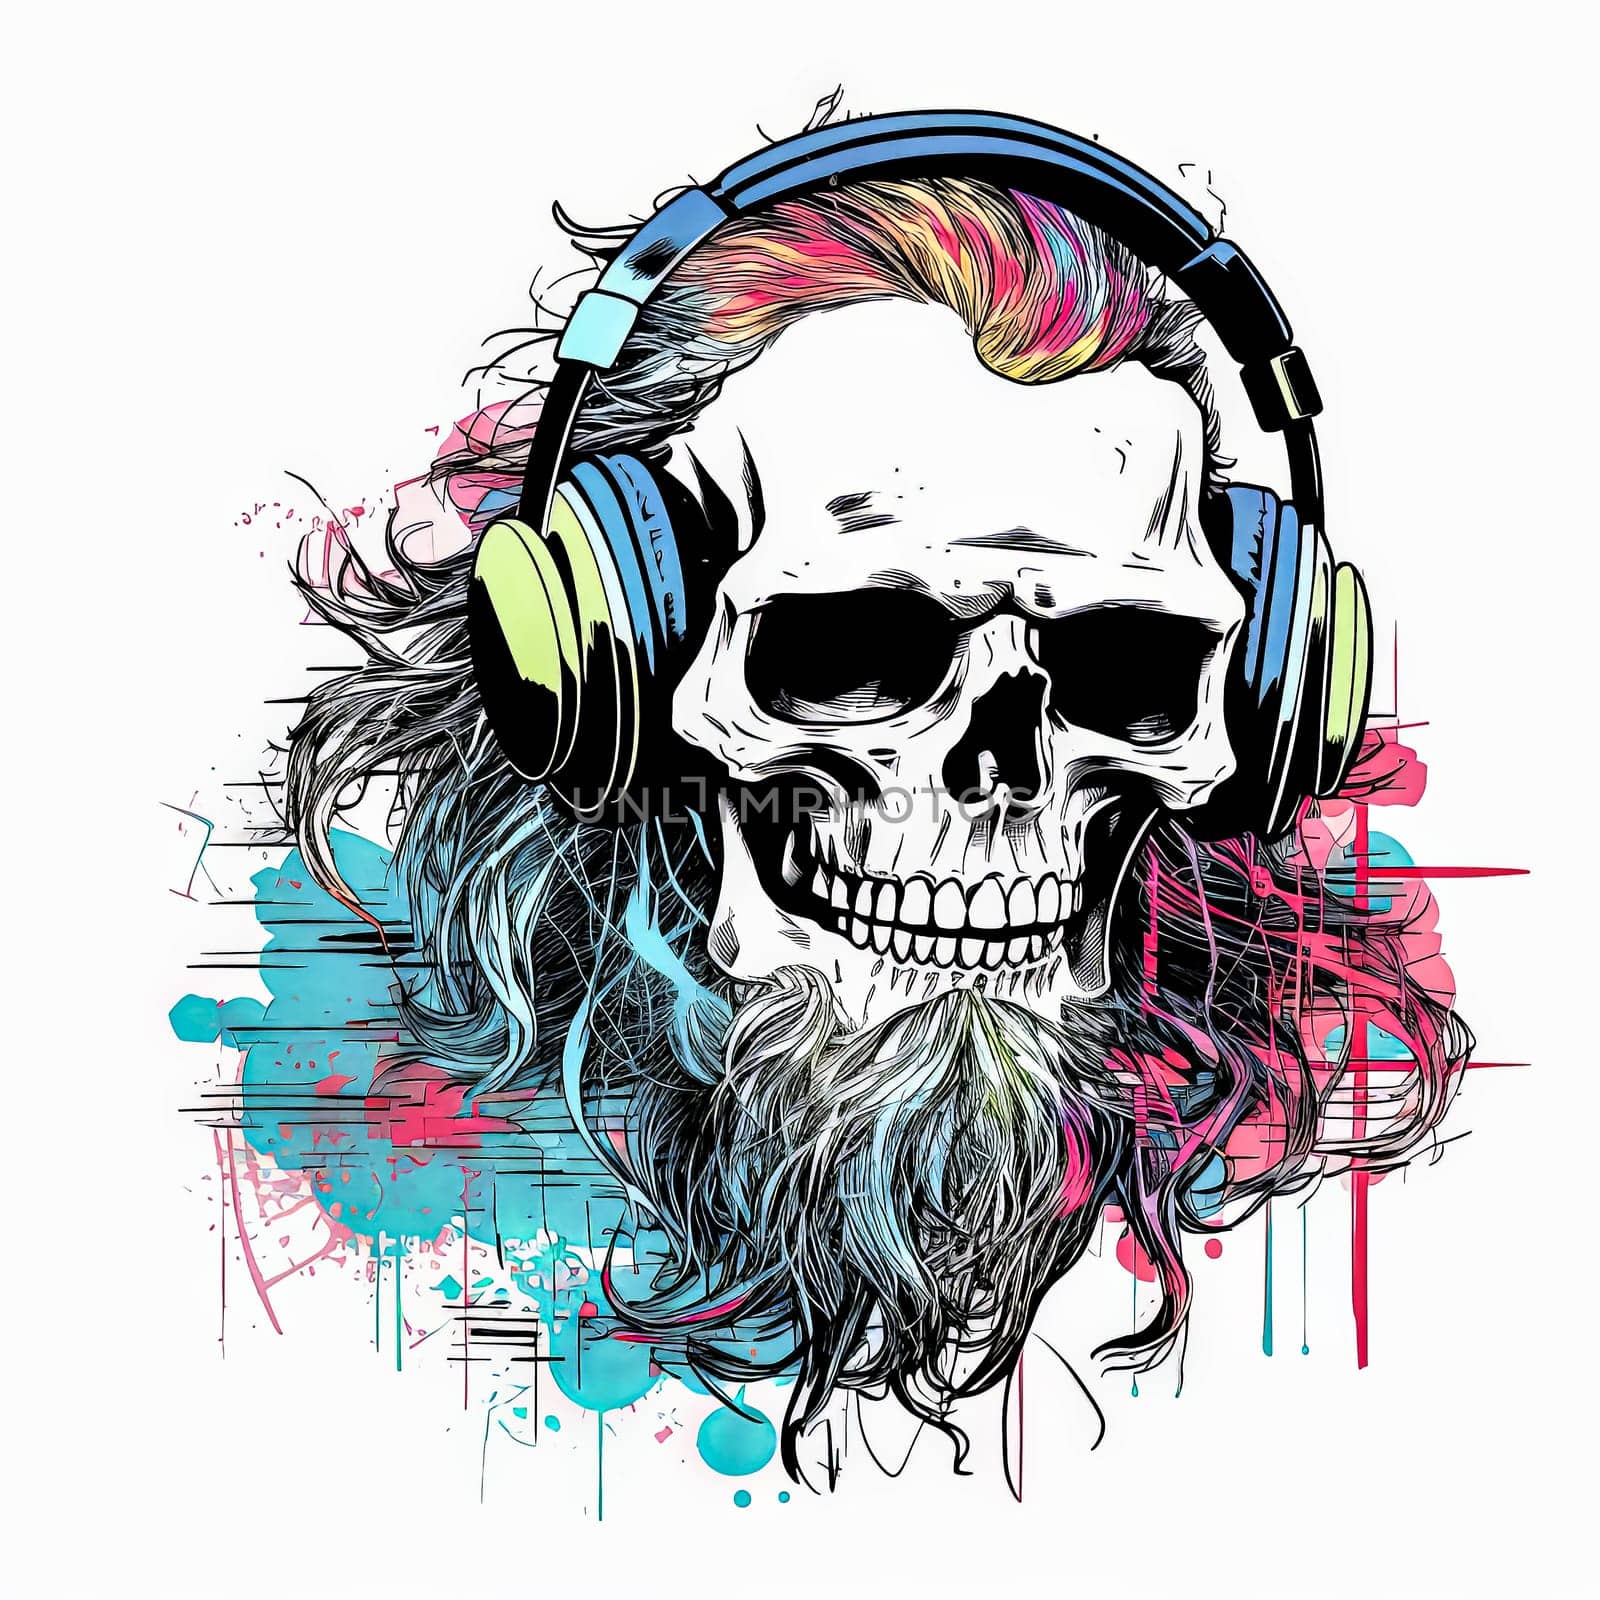 Skull with headphones on it. Skull is white and has a grey face